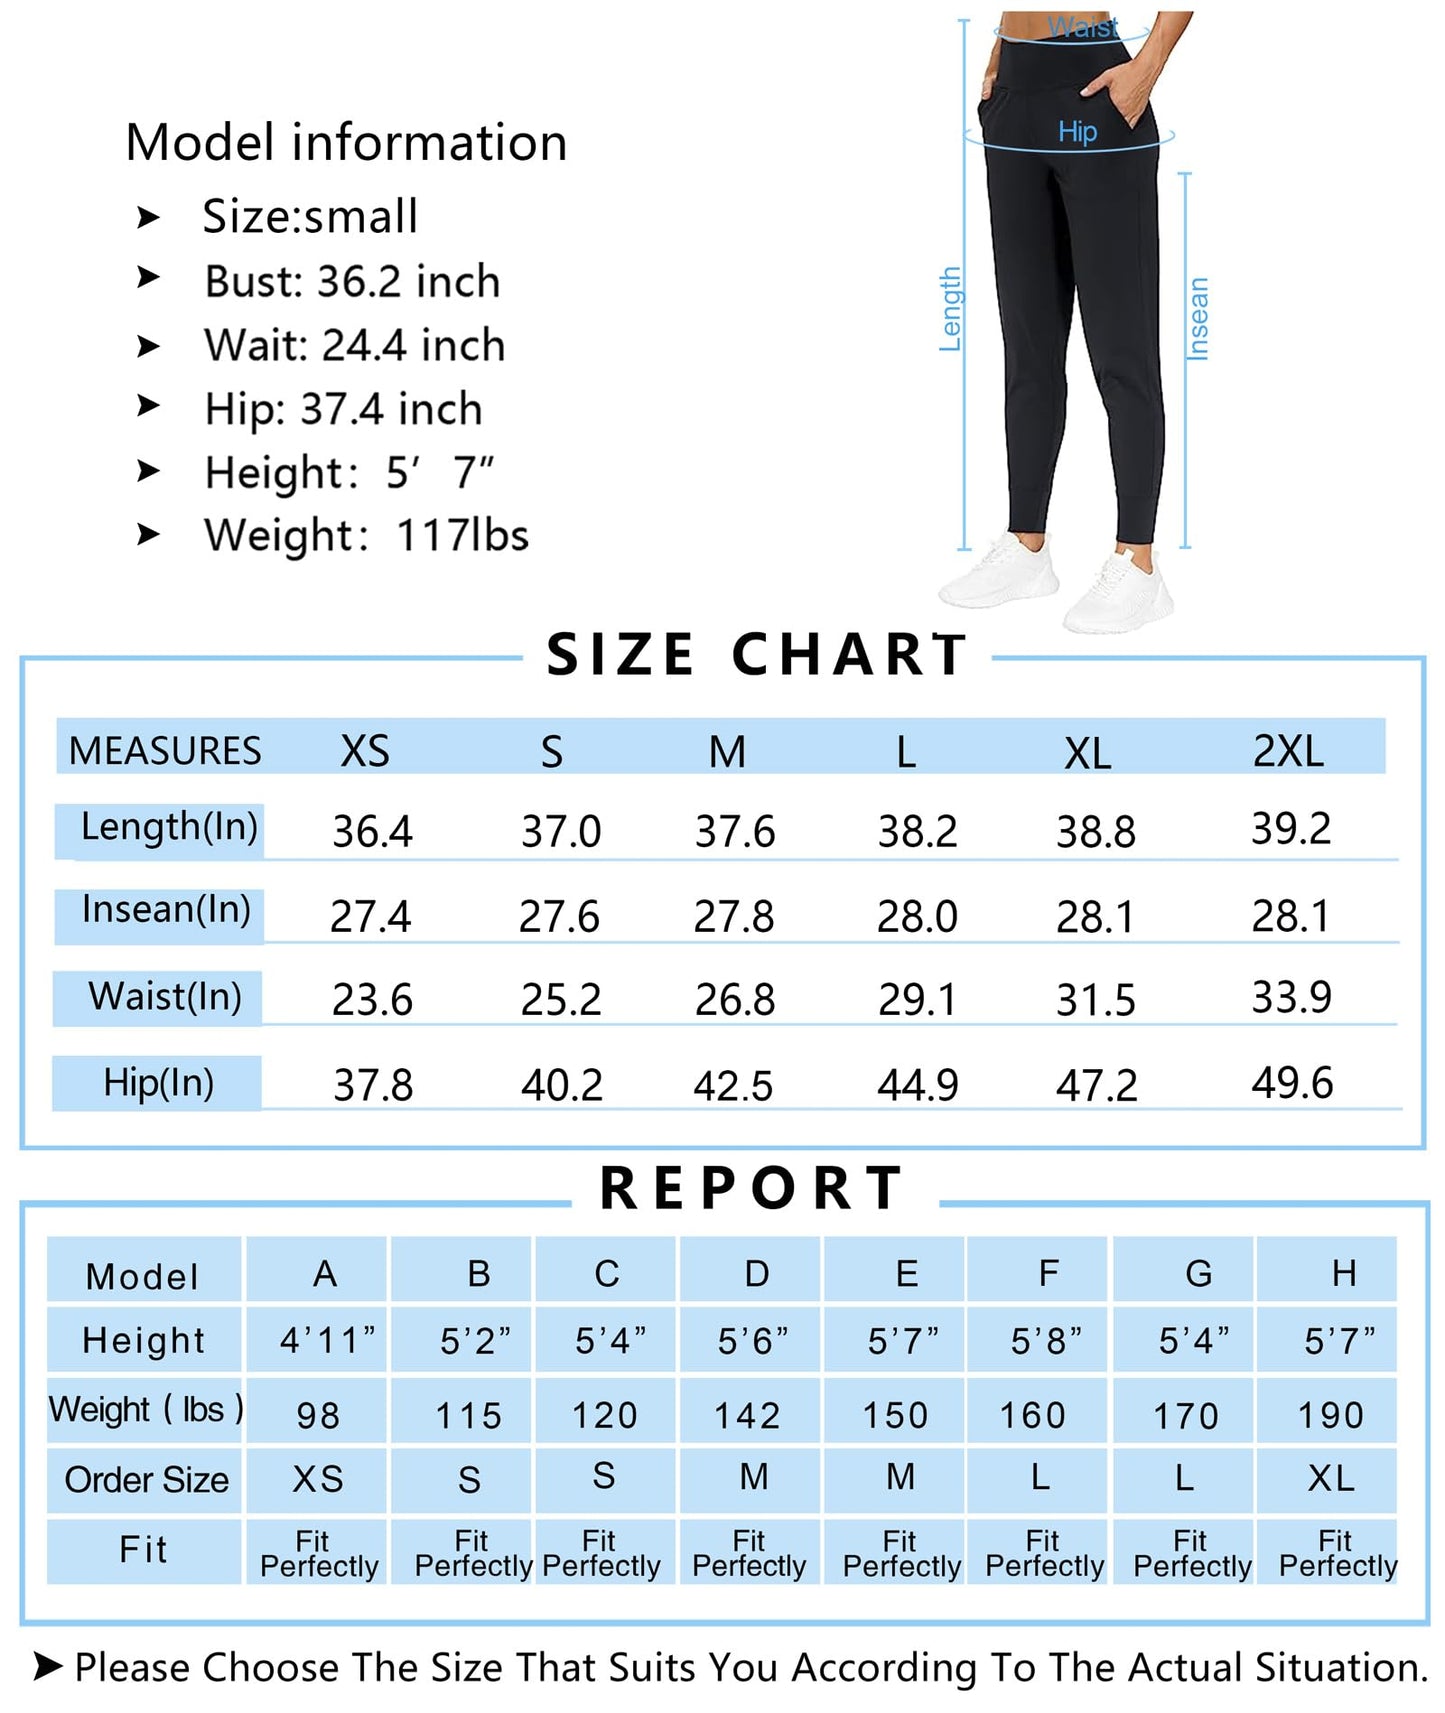 THE GYM PEOPLE Womens Joggers Pants with Pockets Athletic Leggings Tapered Lounge Pants for Workout, Yoga, Running, Training (Medium, Black)